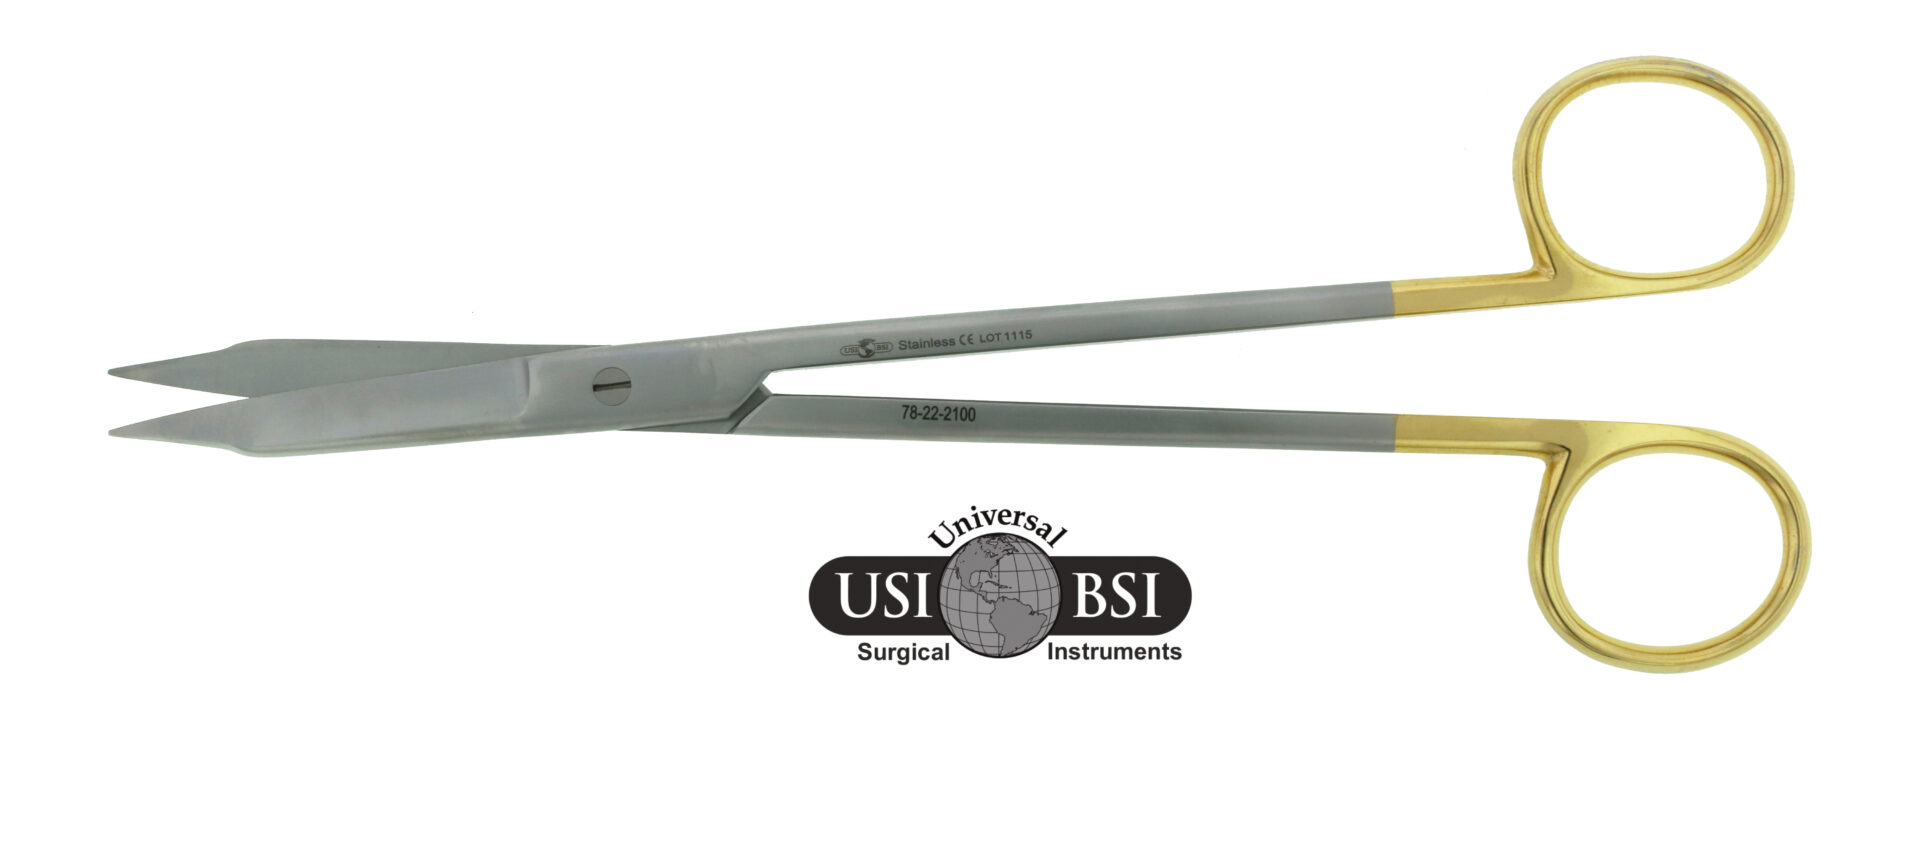 A pair of scissors with a us 1 bsi seal.